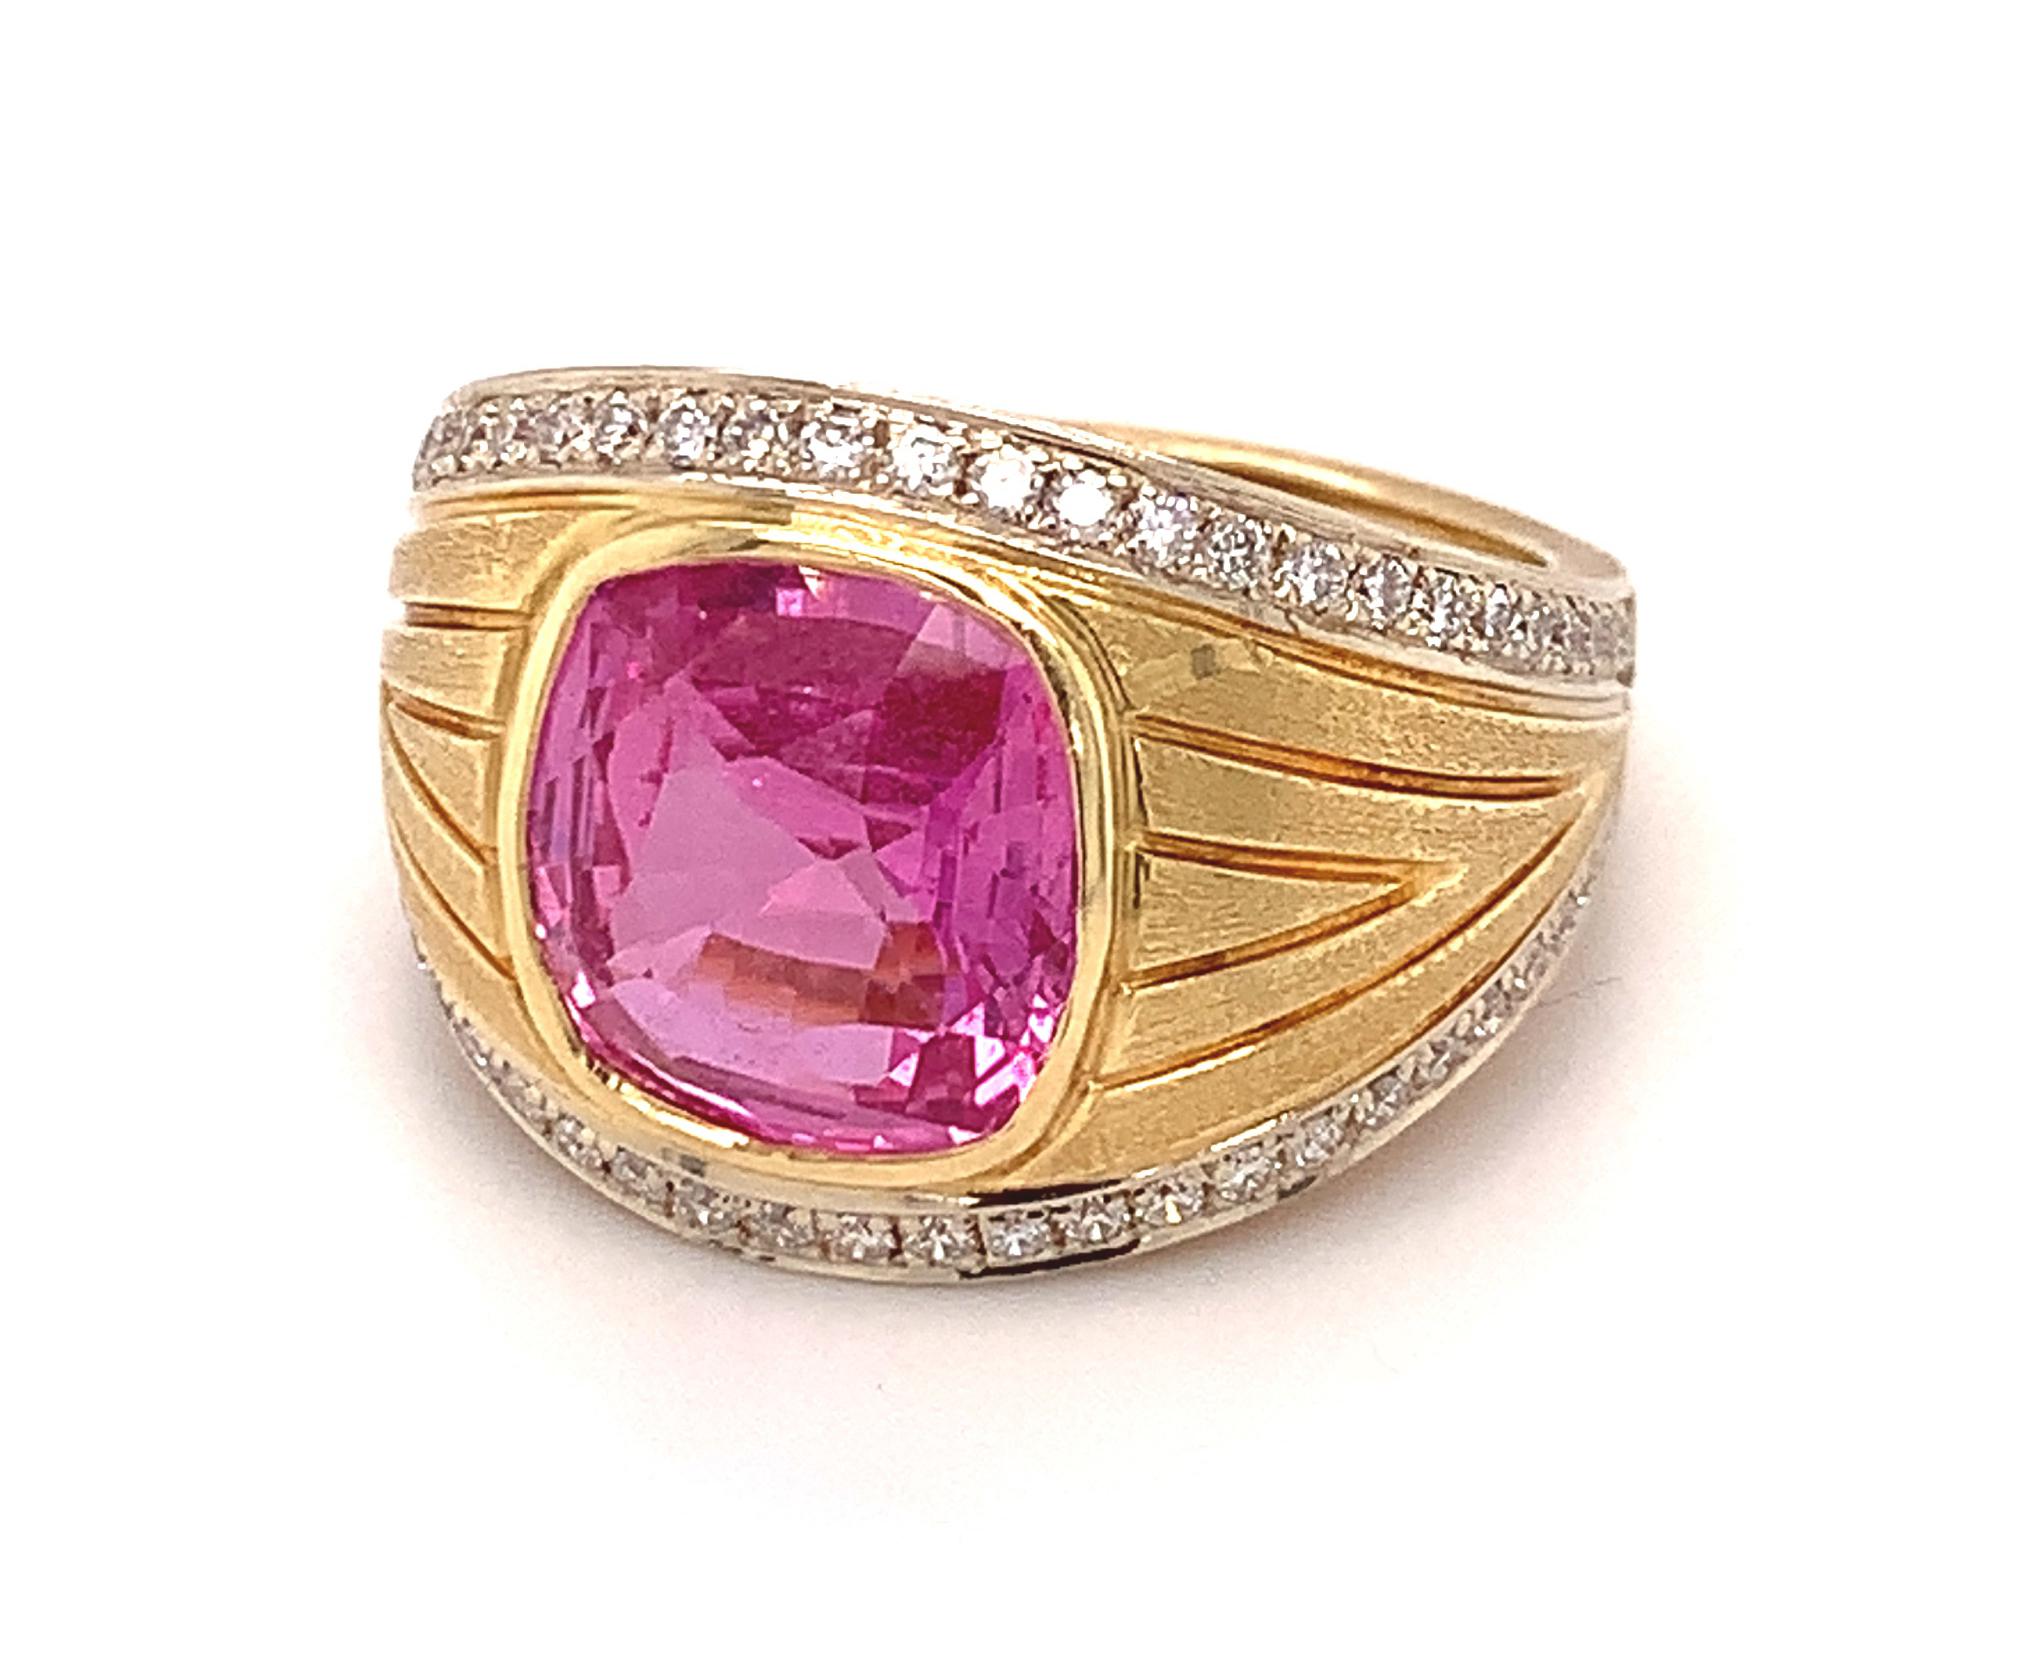 Artisan GIA Certified 5.20 Carat Pink Sapphire and Diamond Ring in 18k Gold For Sale